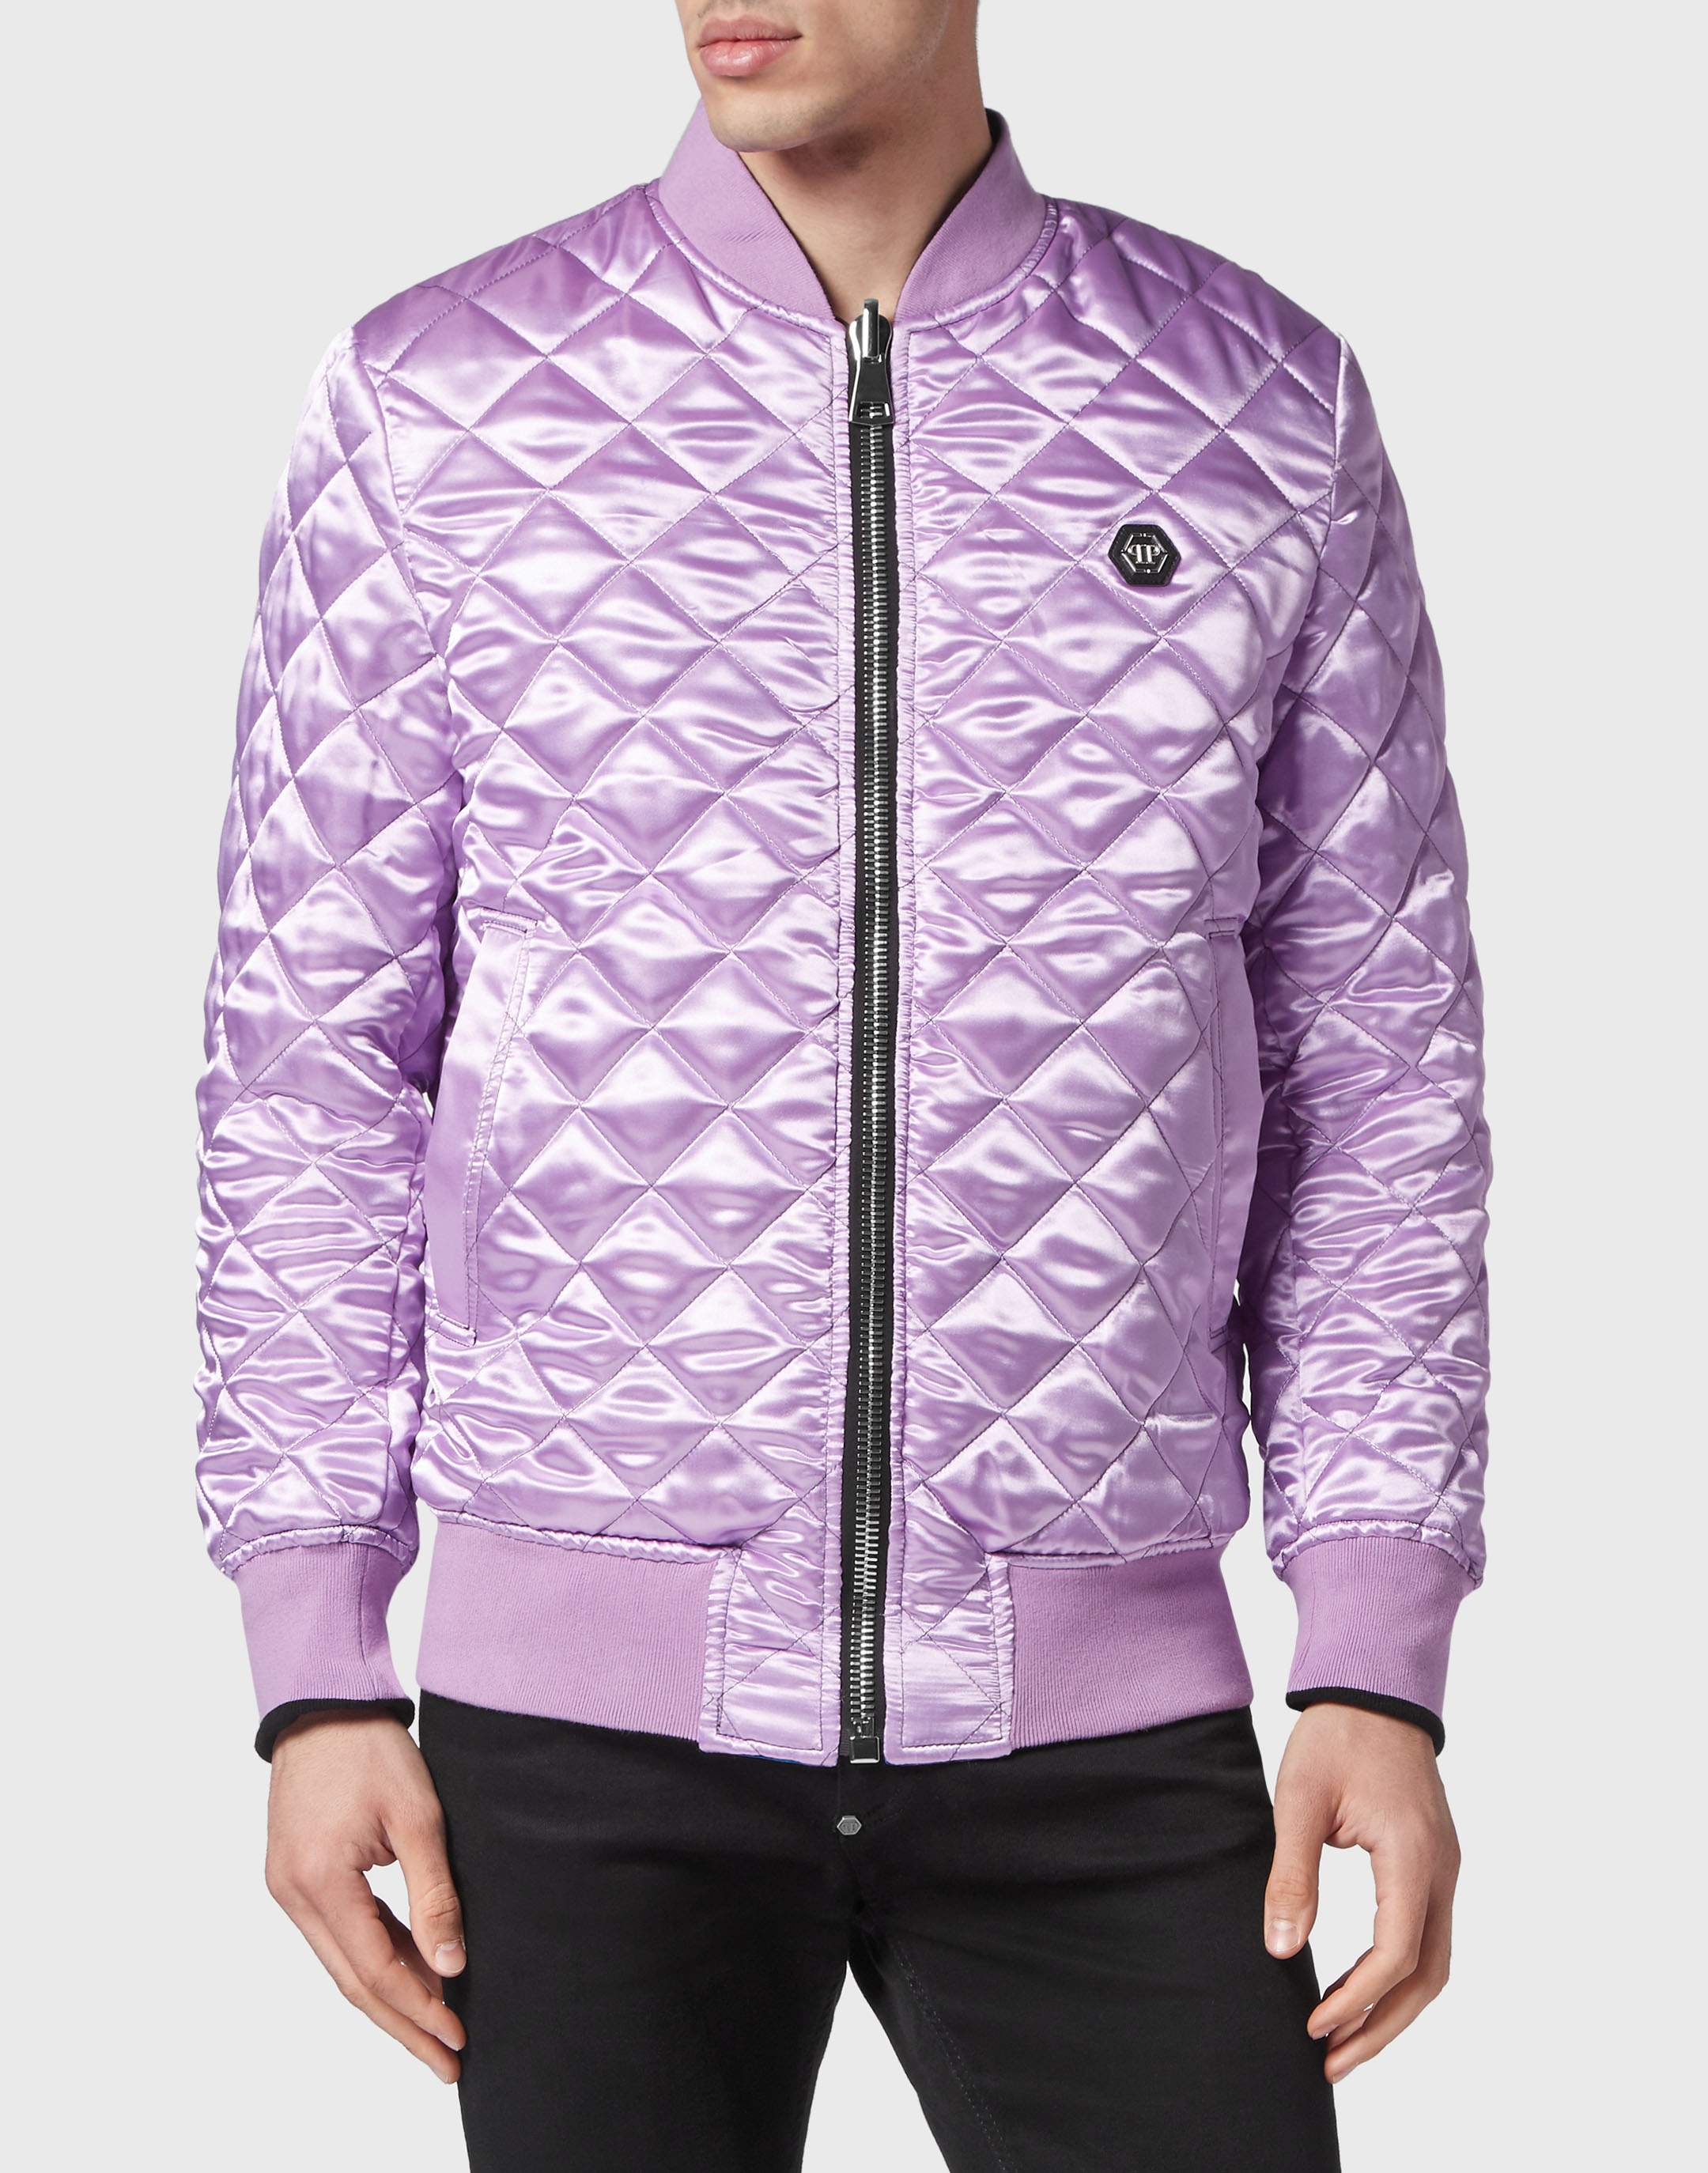 Palm Angels Storm Monogram Zipped Track Jacket in Purple for Men